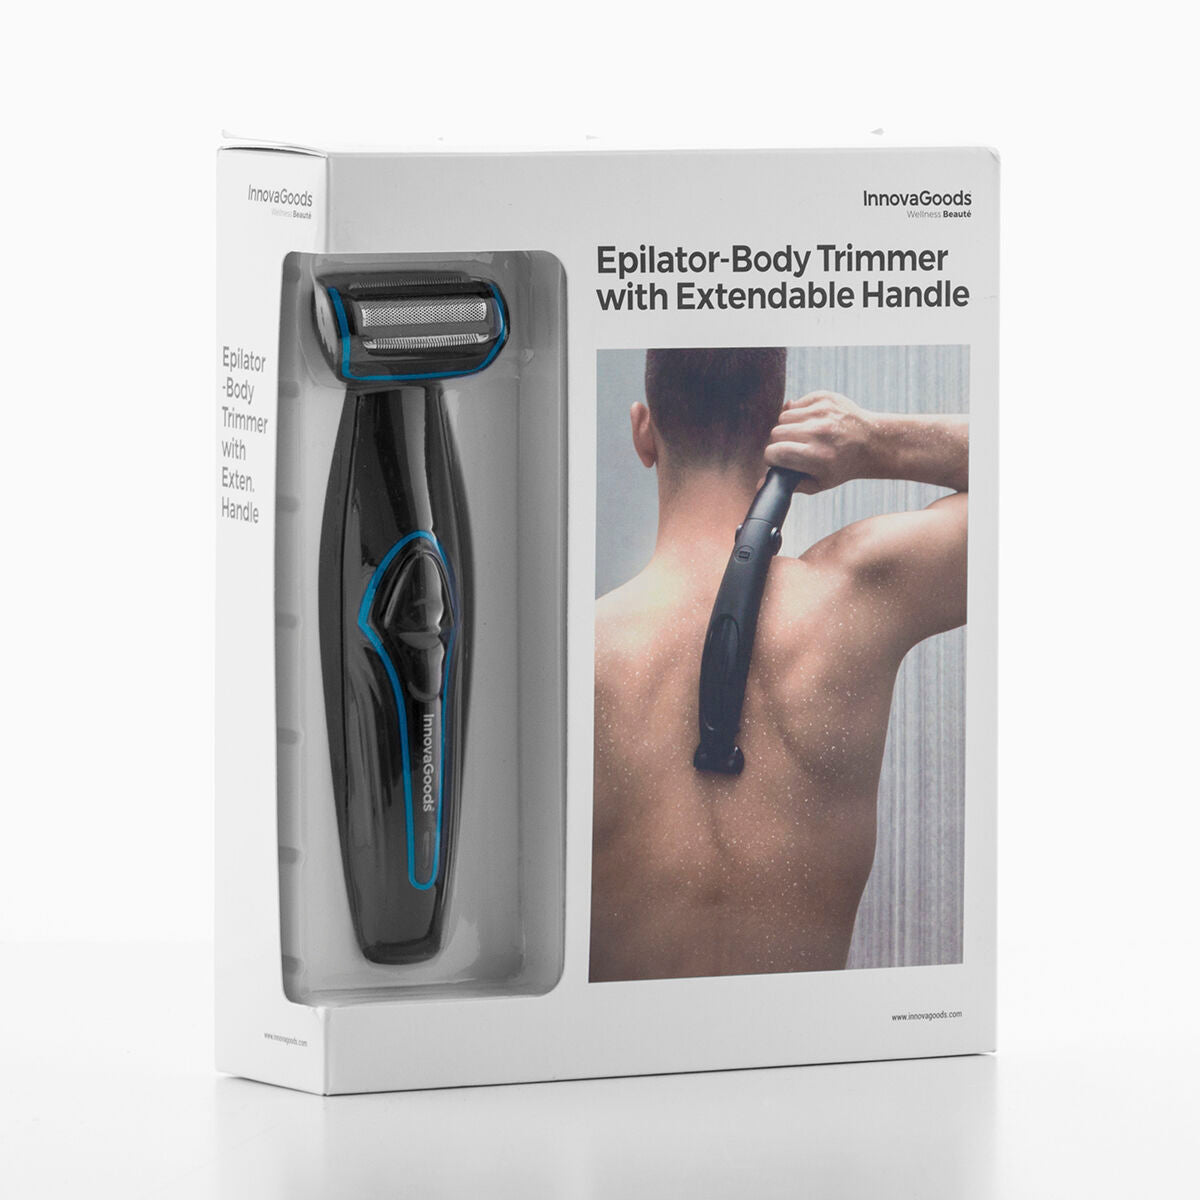 Epilator-Body Trimmer with Extendable Handle InnovaGoods